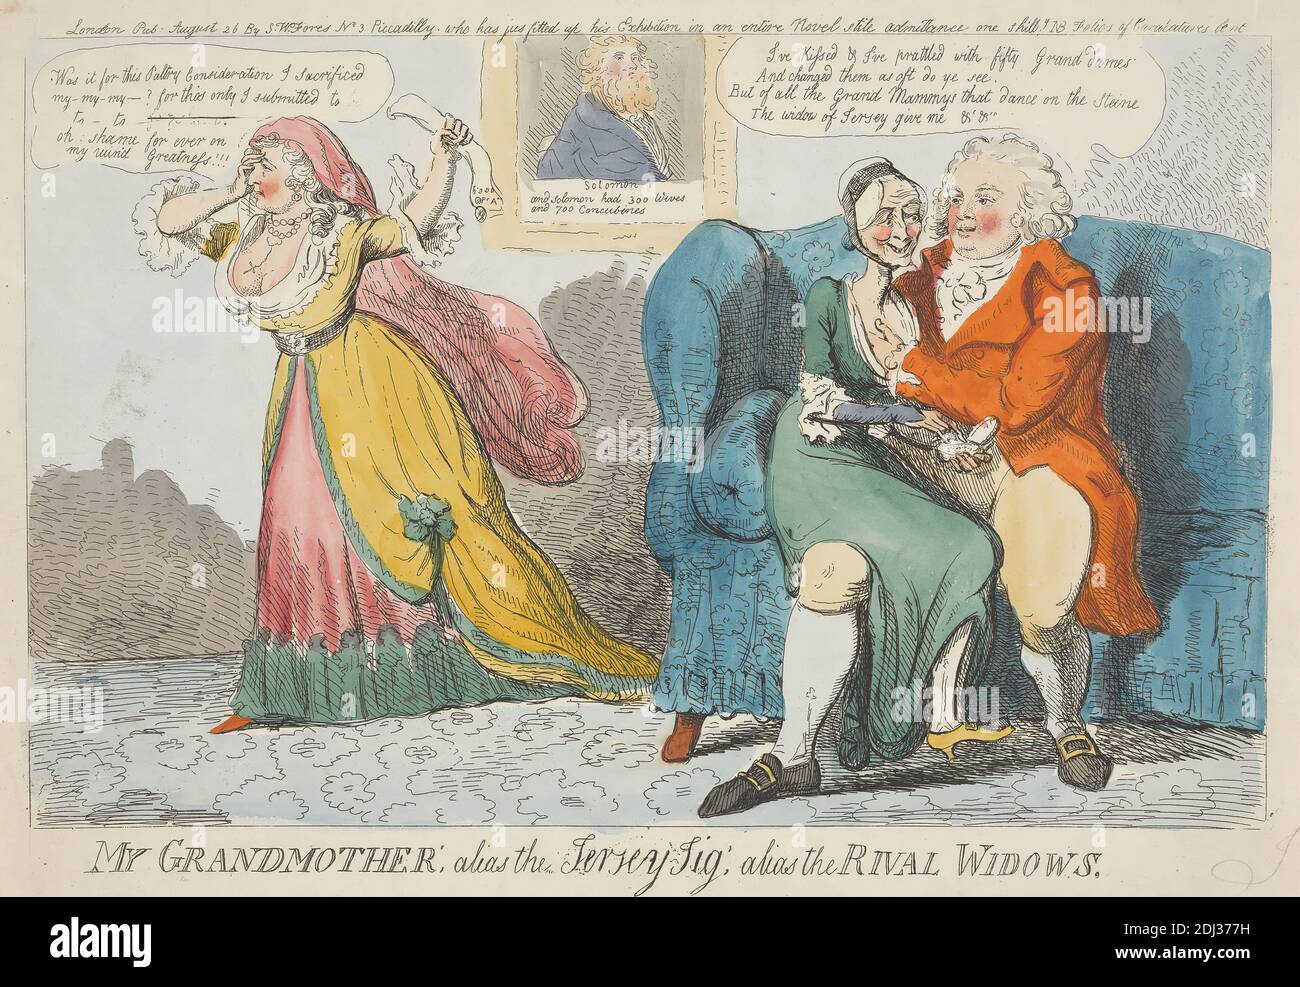 My Grandmother; Alias the Jersey Jig, Alias the Rival Widows, Isaac Cruikshank, 1756–1810, British, 1794, Etching, hand-colored, Sheet: 8 1/4 x 12 7/8in. (21 x 32.7cm Stock Photo